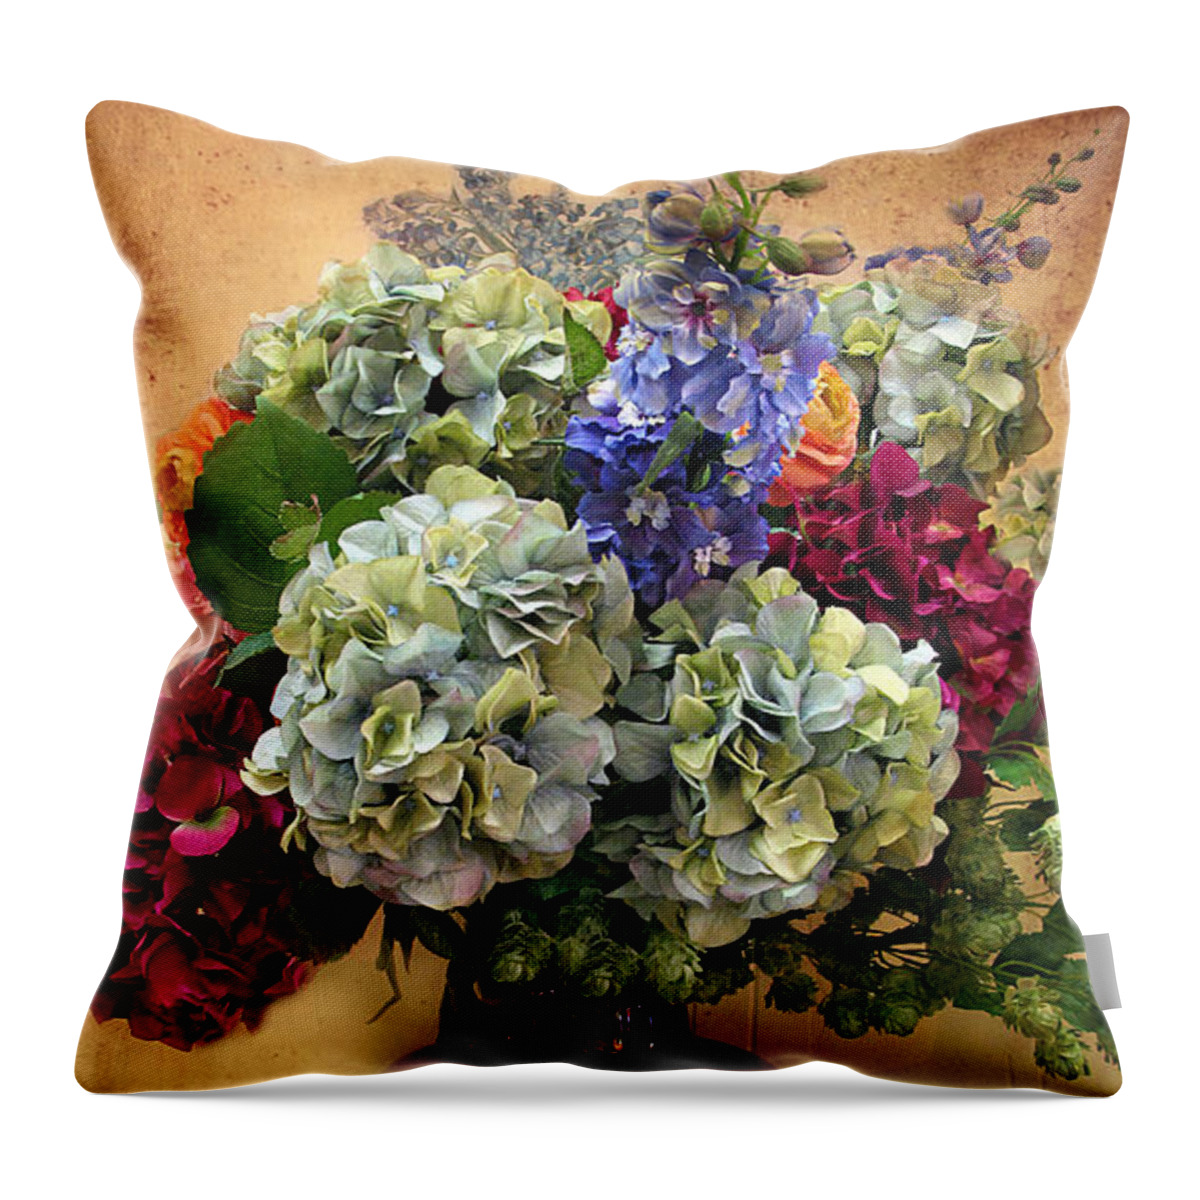 Flowers Throw Pillow featuring the photograph Hydrangea Still Life by Jessica Jenney